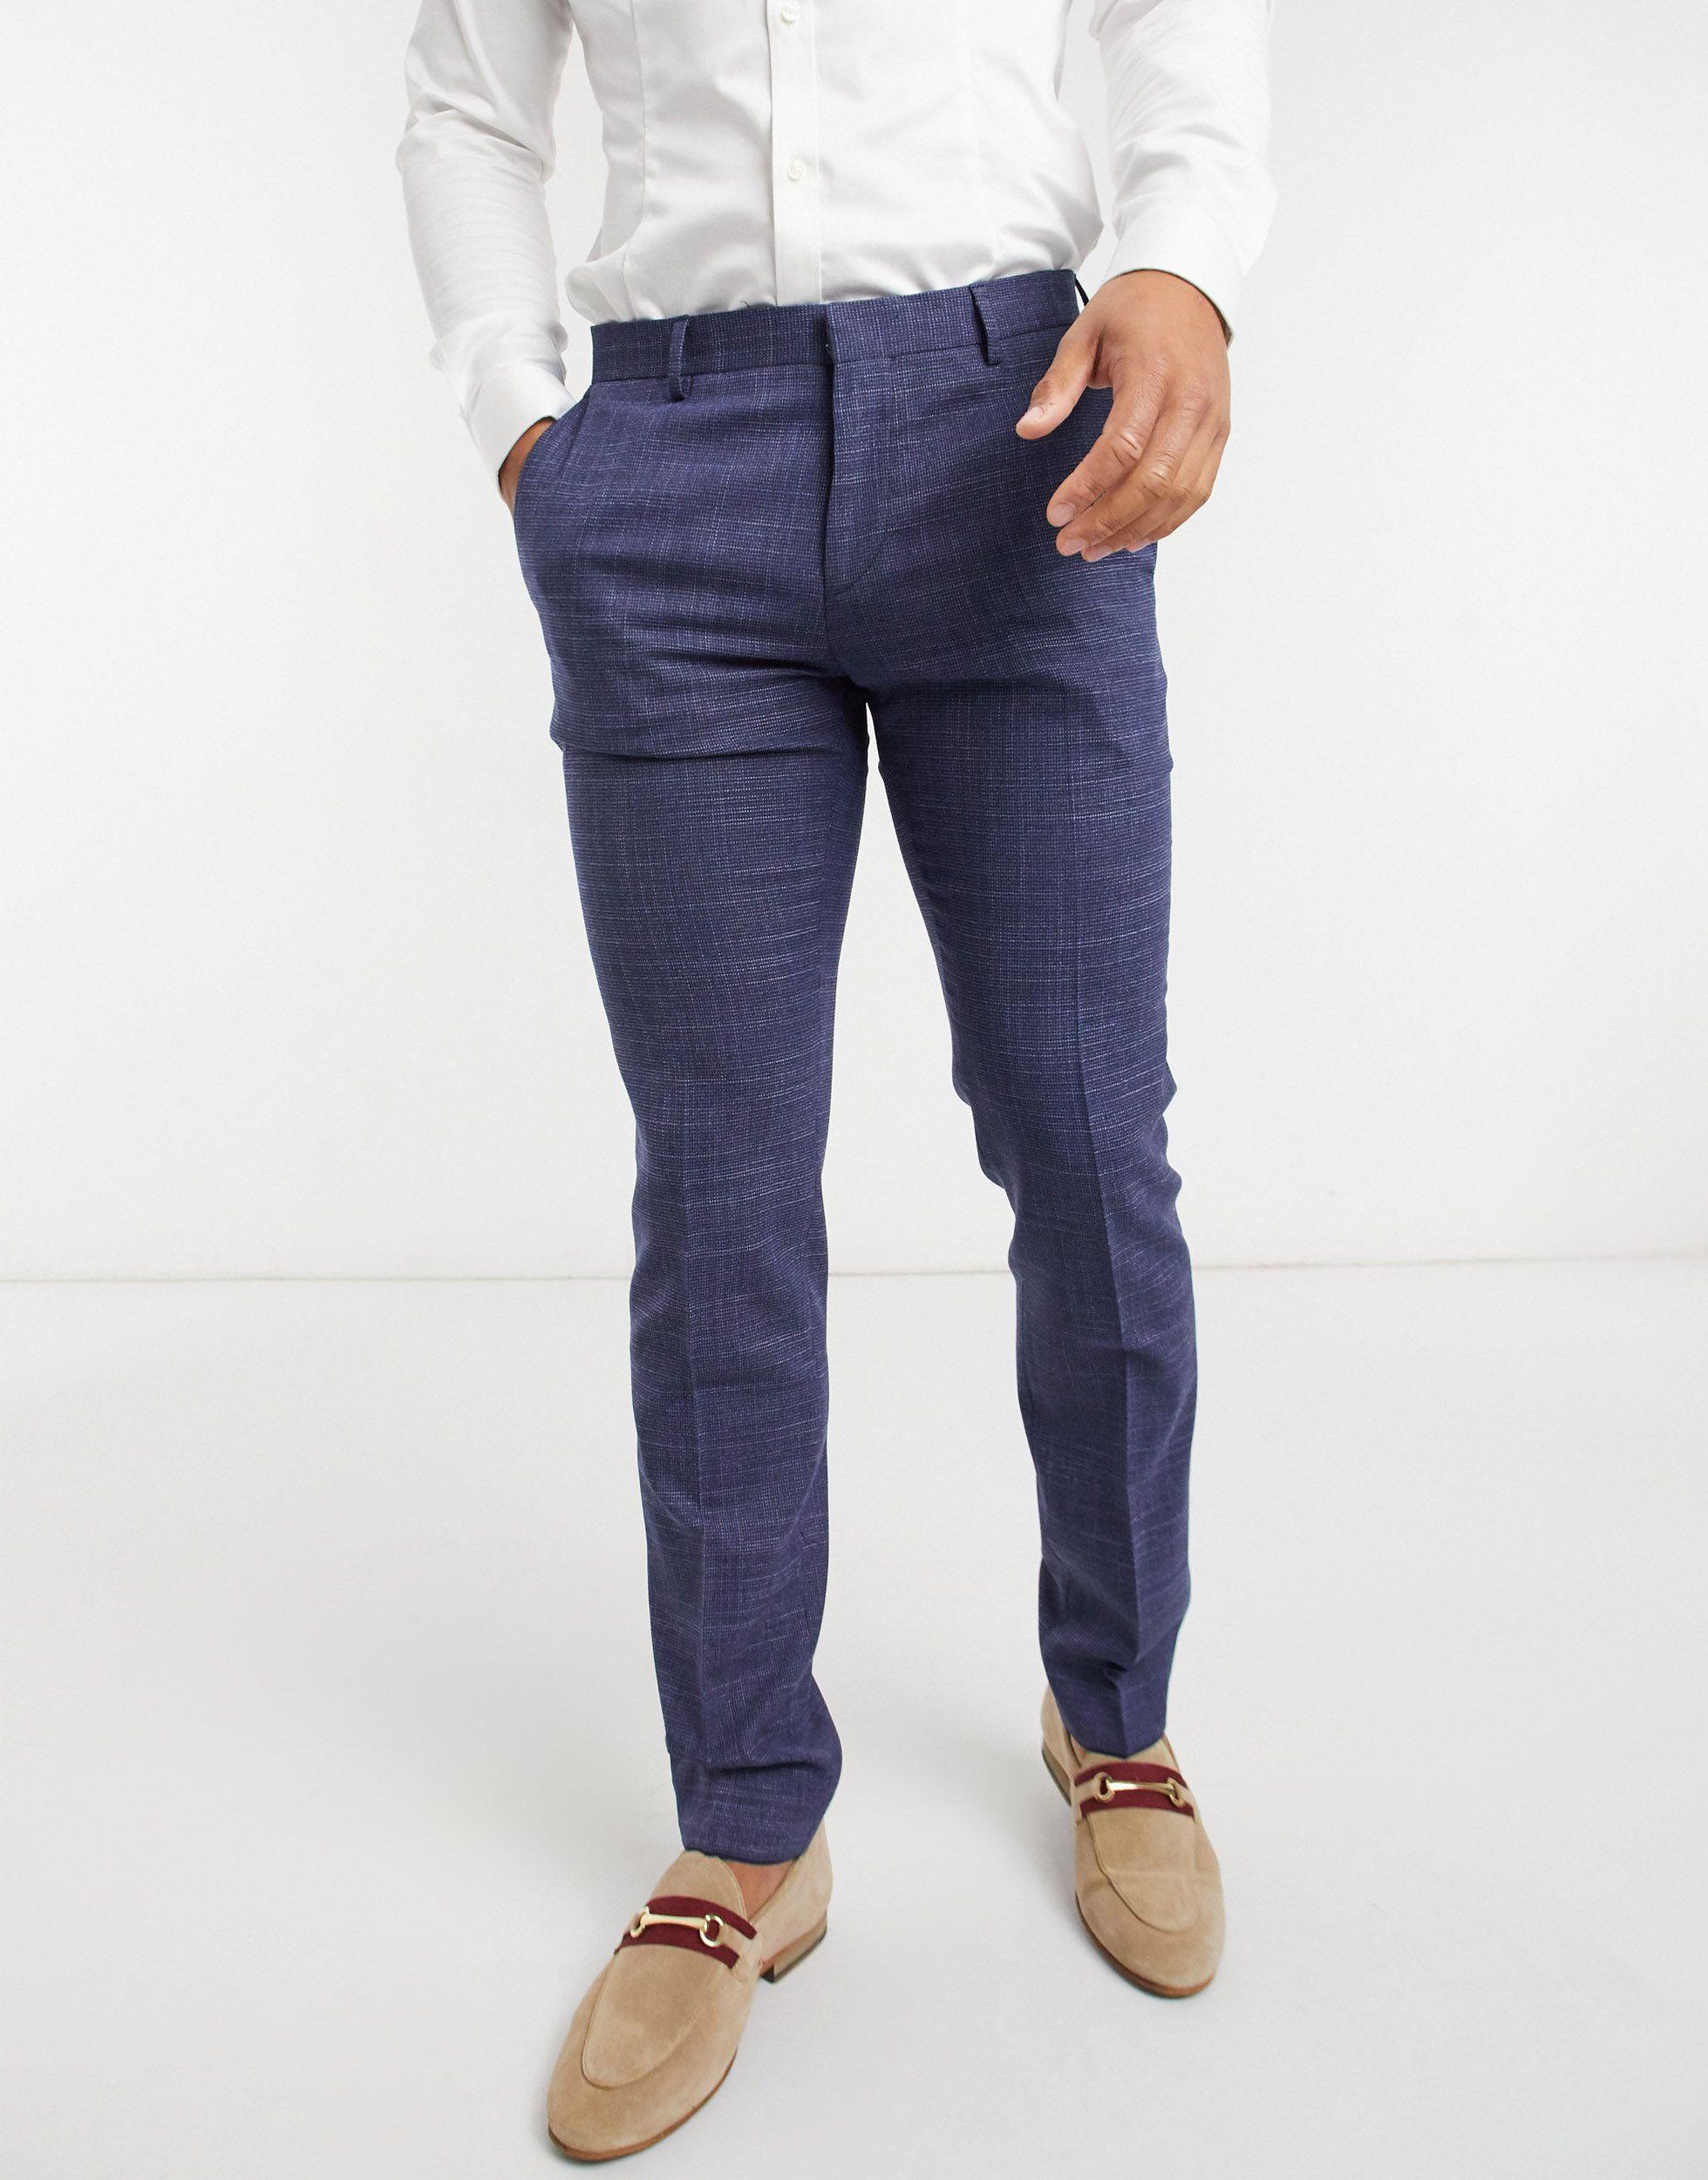 Tommy Hilfiger Cotton Slim Fit Trousers in Blue Slacks and Chinos Skinny trousers Womens Clothing Trousers 